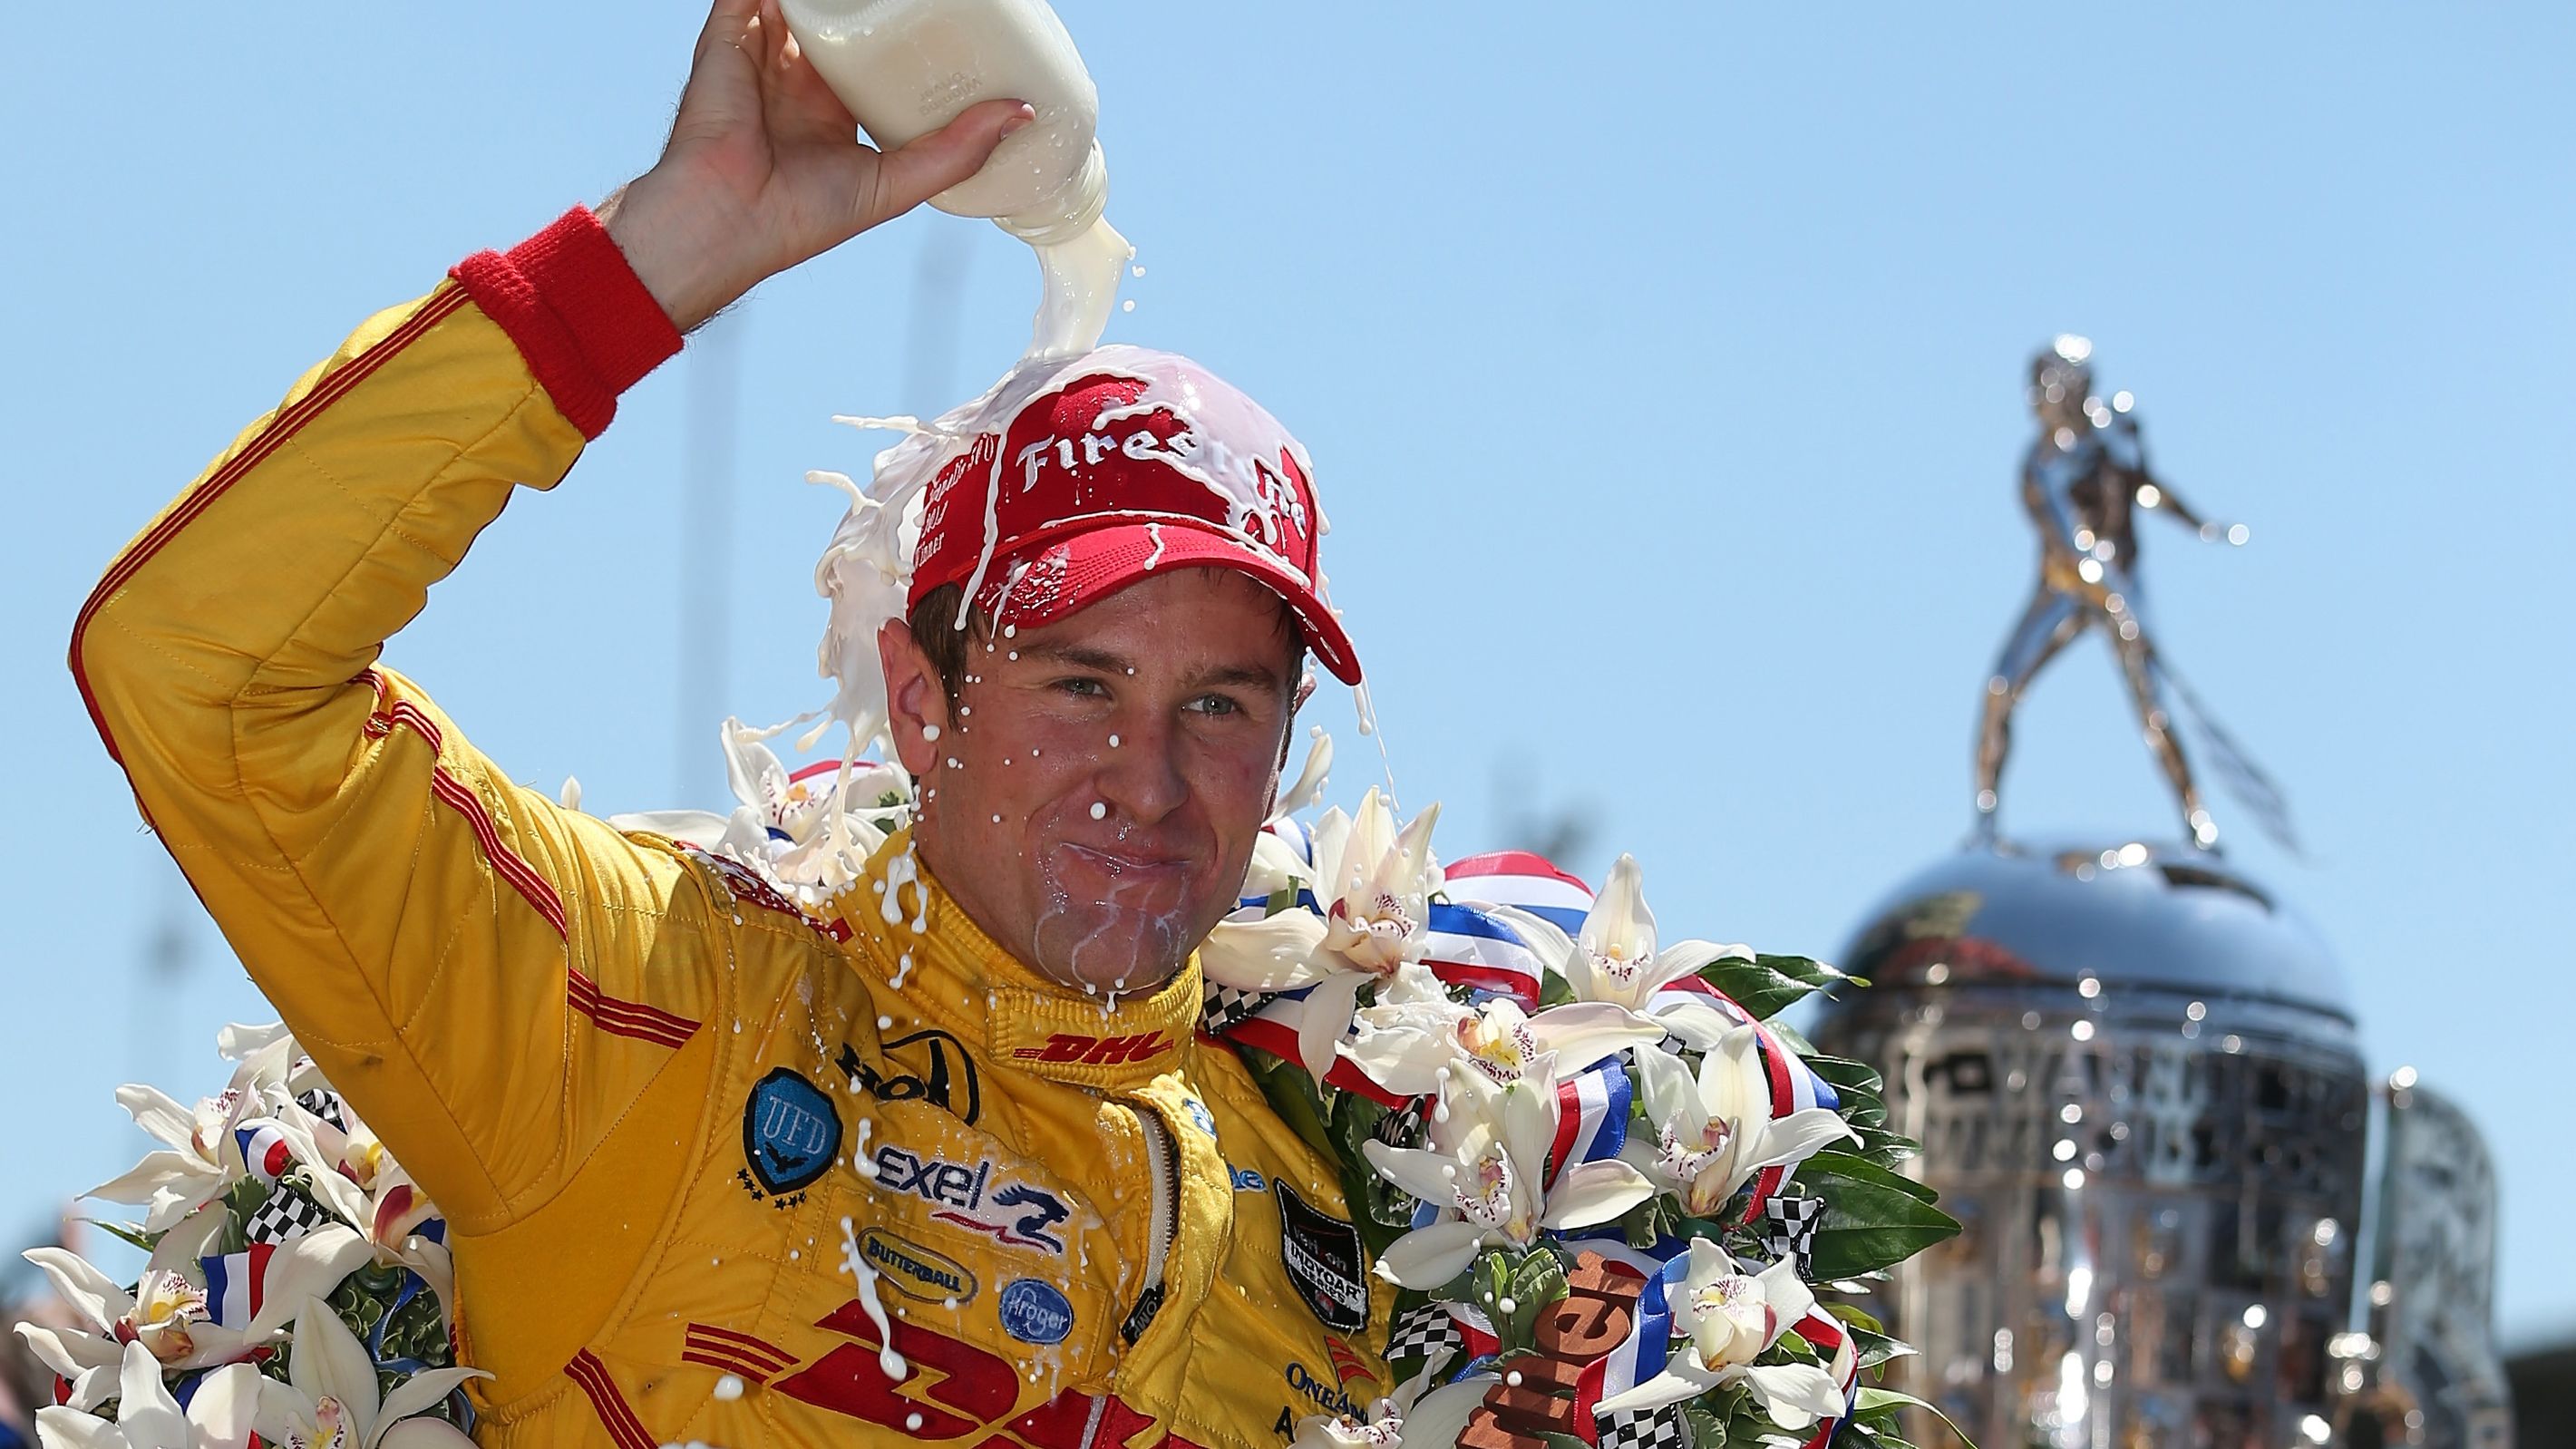 Ryan Hunter-Reay pours the customary milk over his head after winning the 2014 Indianapolis 500.